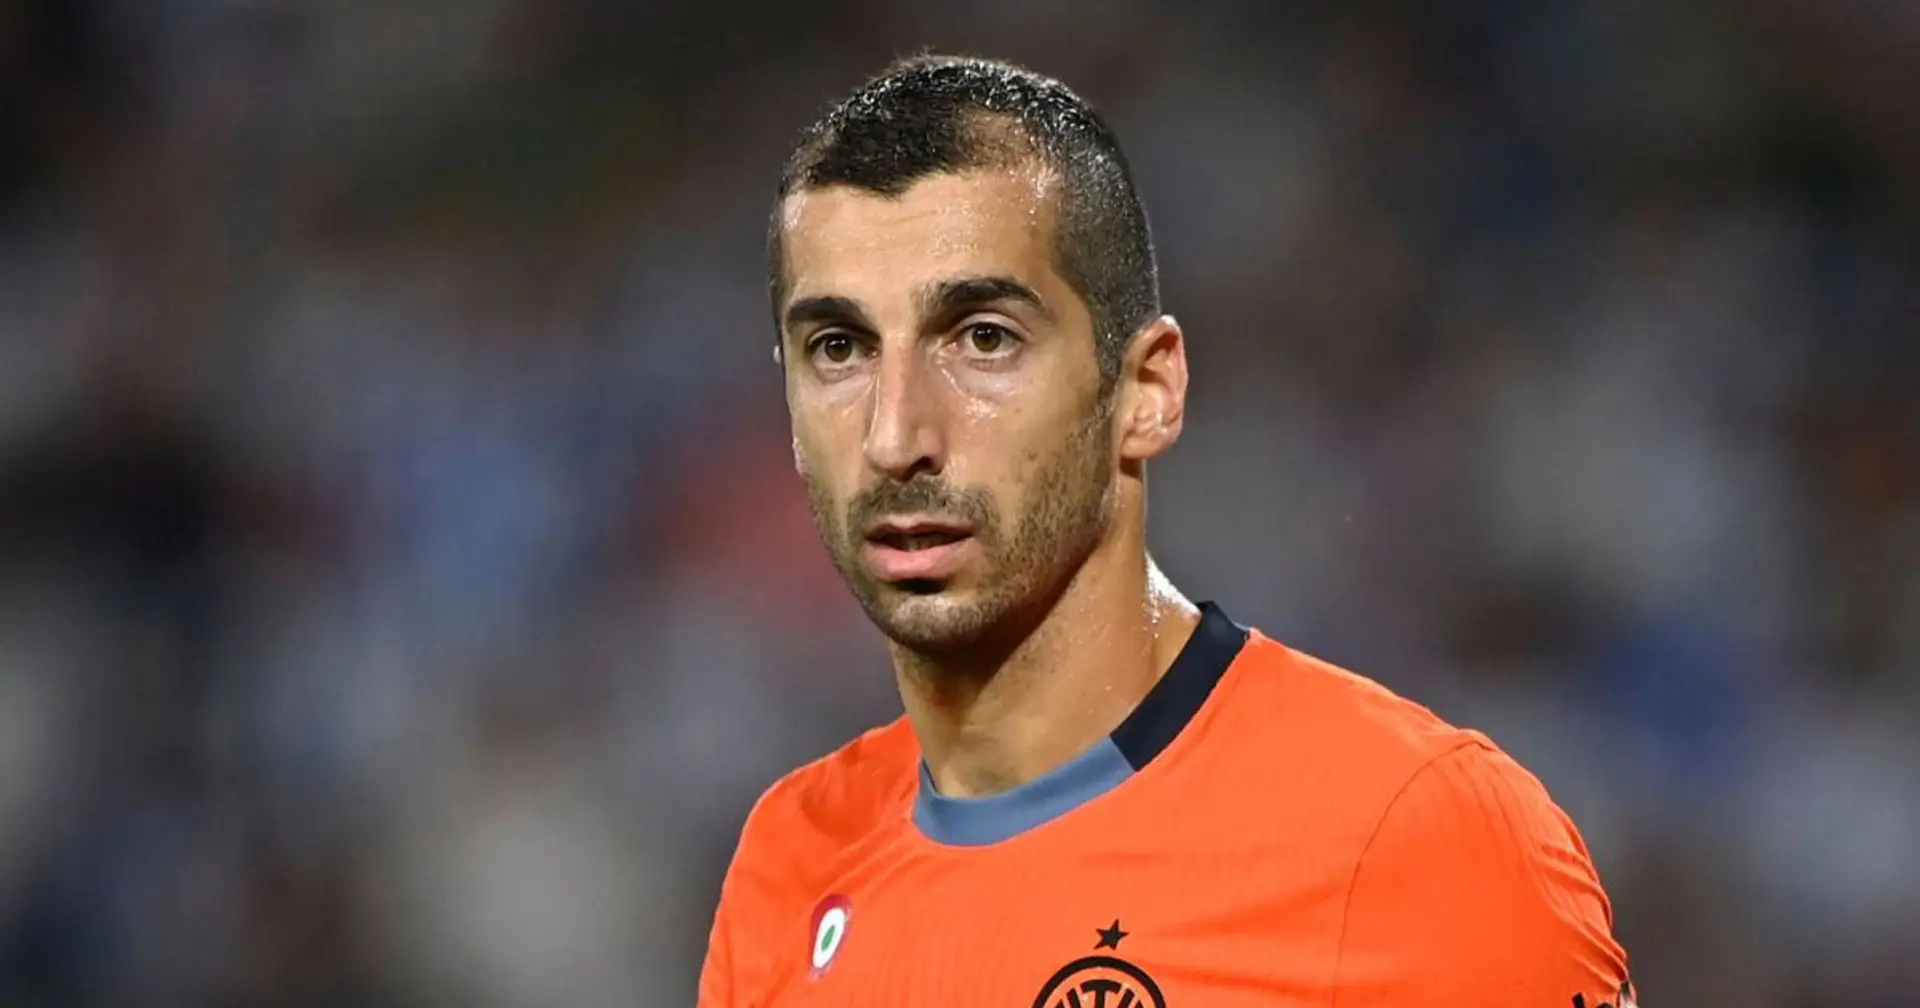 Inter have been trying to come to terms with Henrikh Mkhitaryan, and they are making progress in the conversations with his agent Rafaela Pimenta.